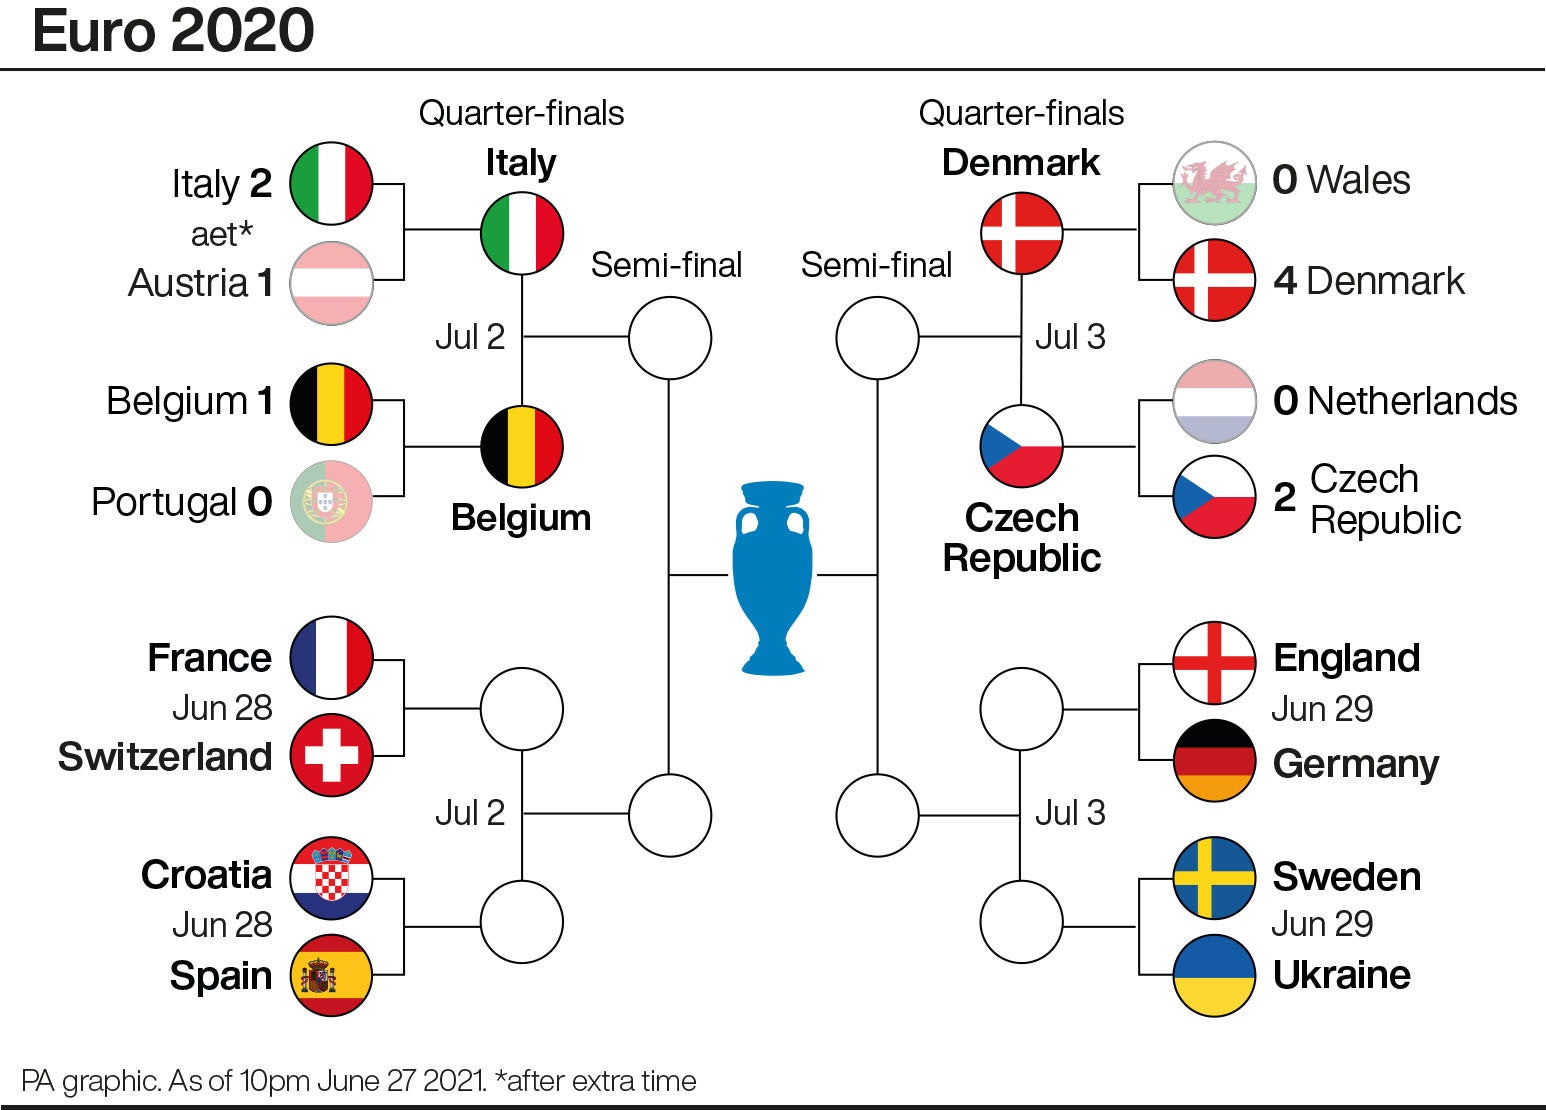 Two of the Euro 2020 quarter-finals have now been confirmed